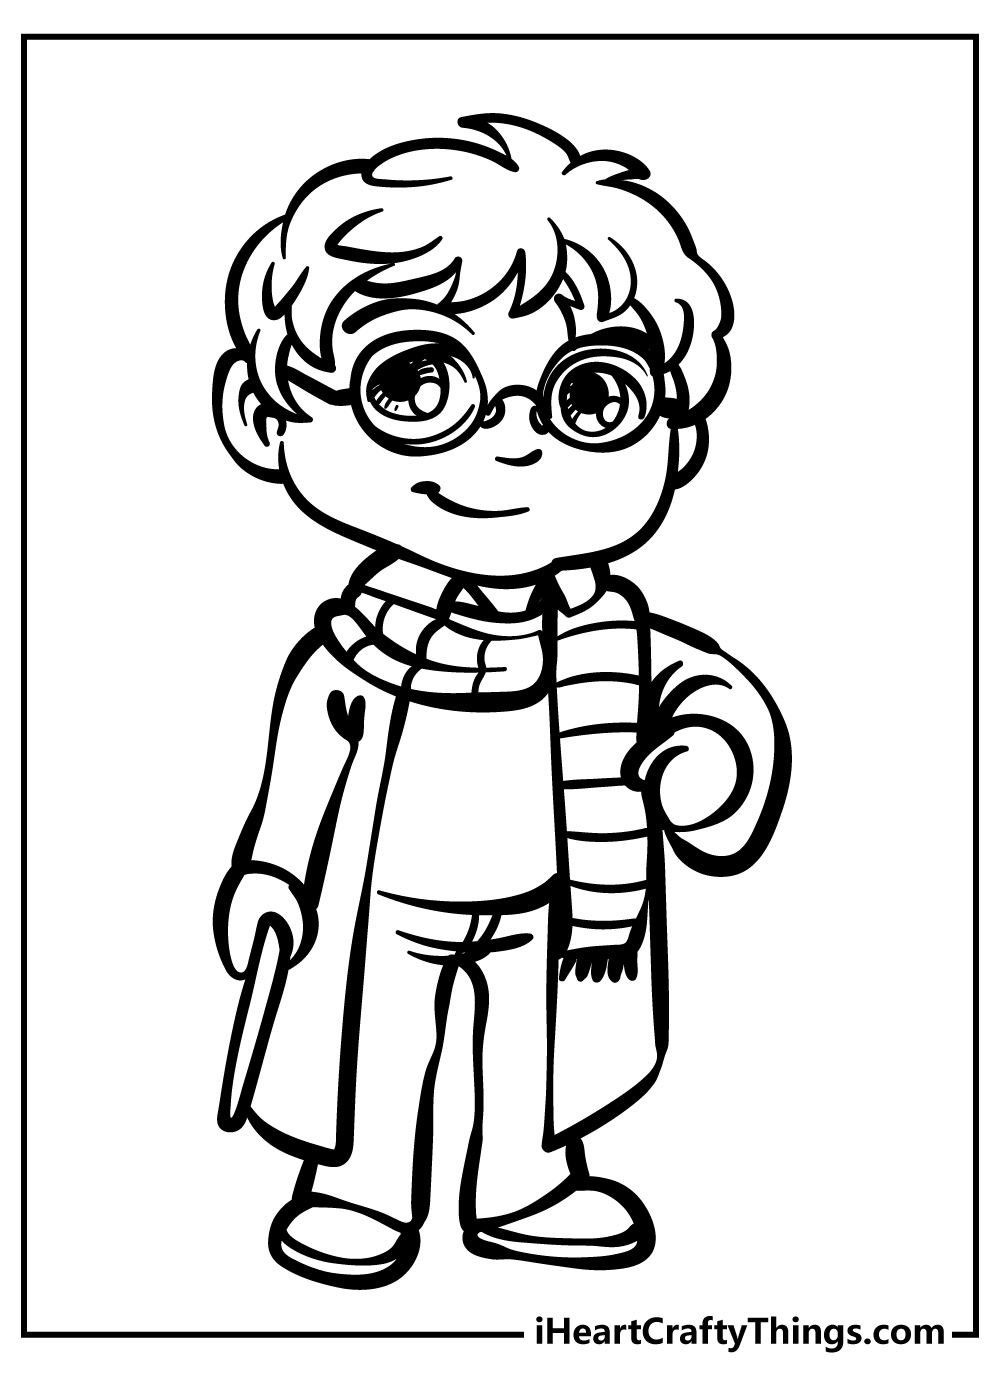 Harry Potter coloring pages free printable